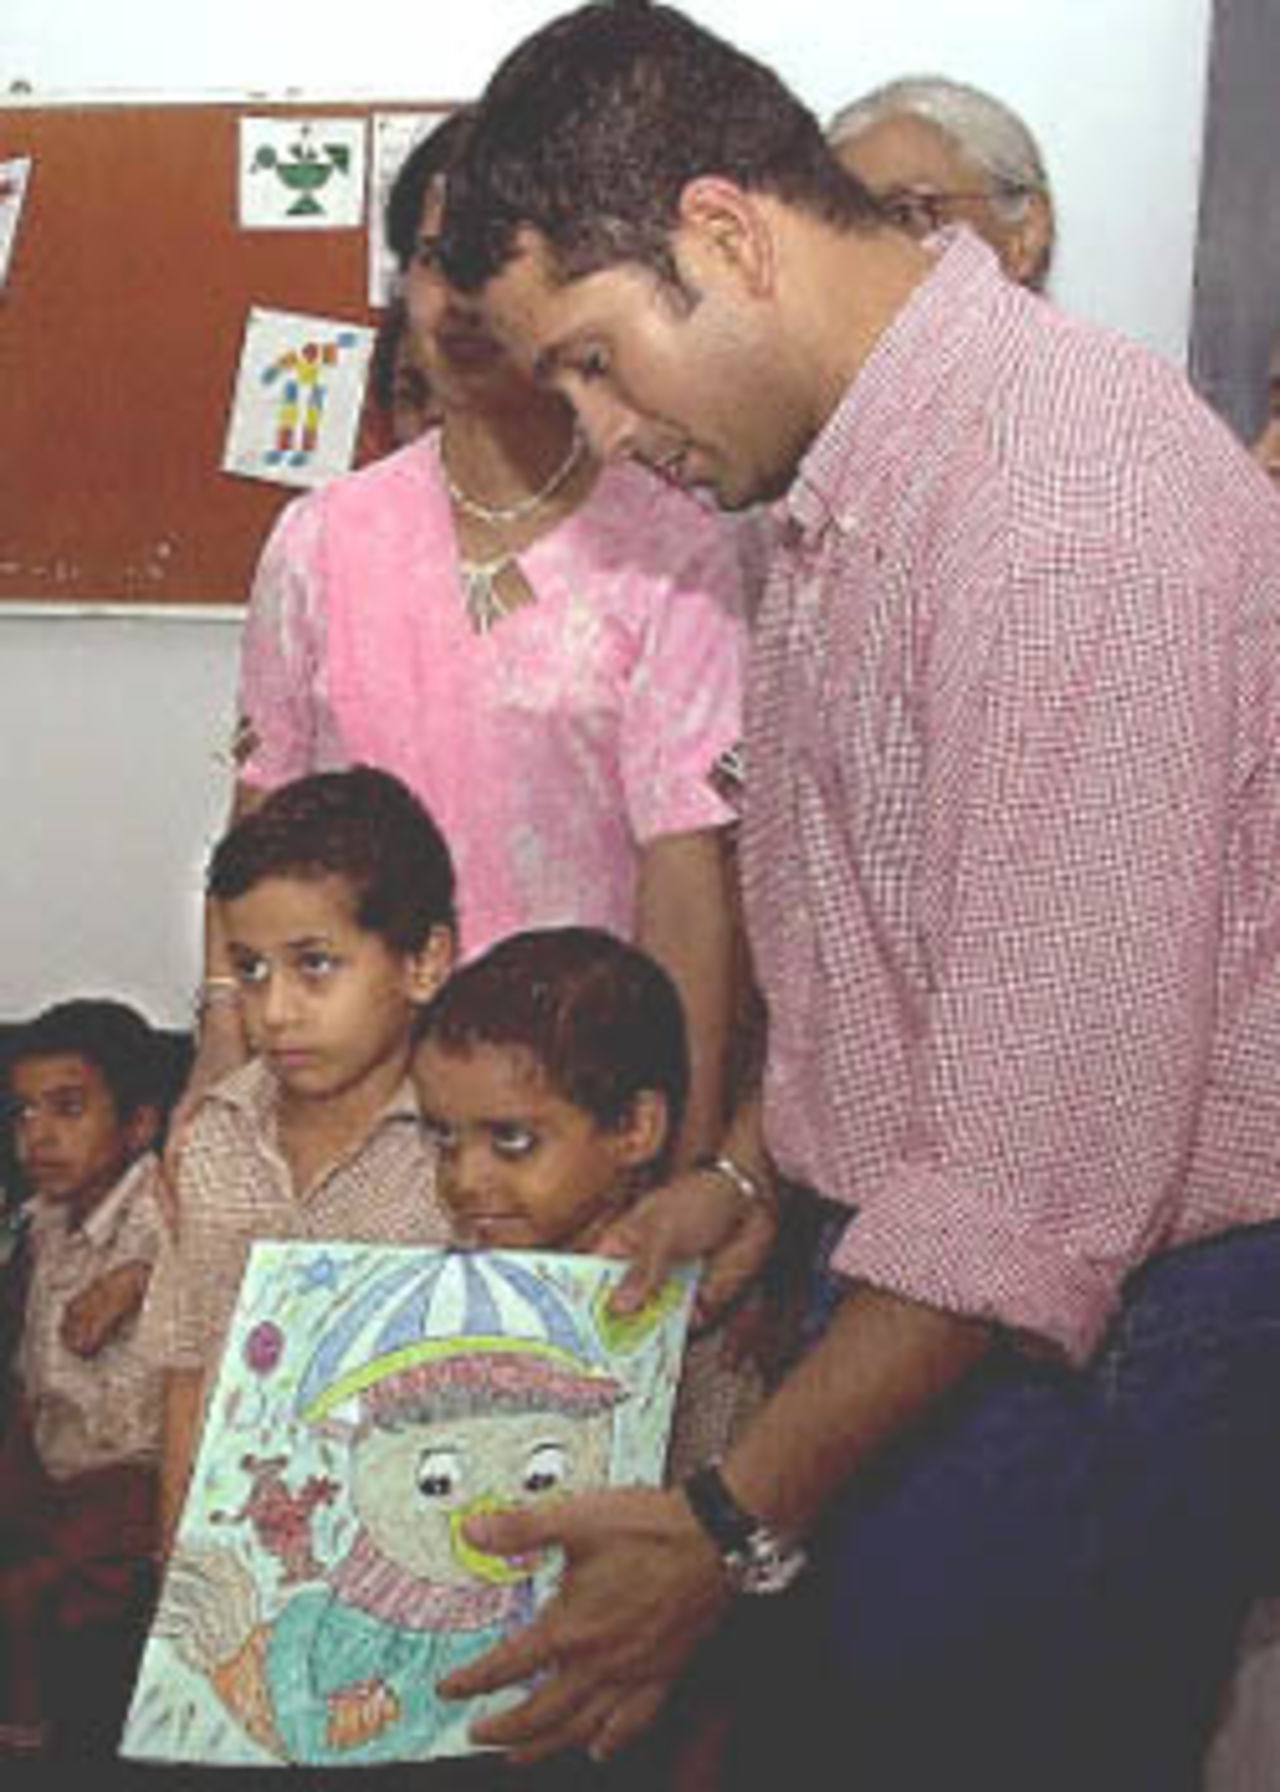 Indian cricket star Sachin Tendulkar (R) poses with a drawing given to him by a physically challenged child at the Akshay Pratishtan Vocational Training Centre, 14 July 2000. Tendulkar inaugurated the center, a social service project undertaken by the Rotary Club of Delhi South-end, which provides vocational training to physically handicapped children.